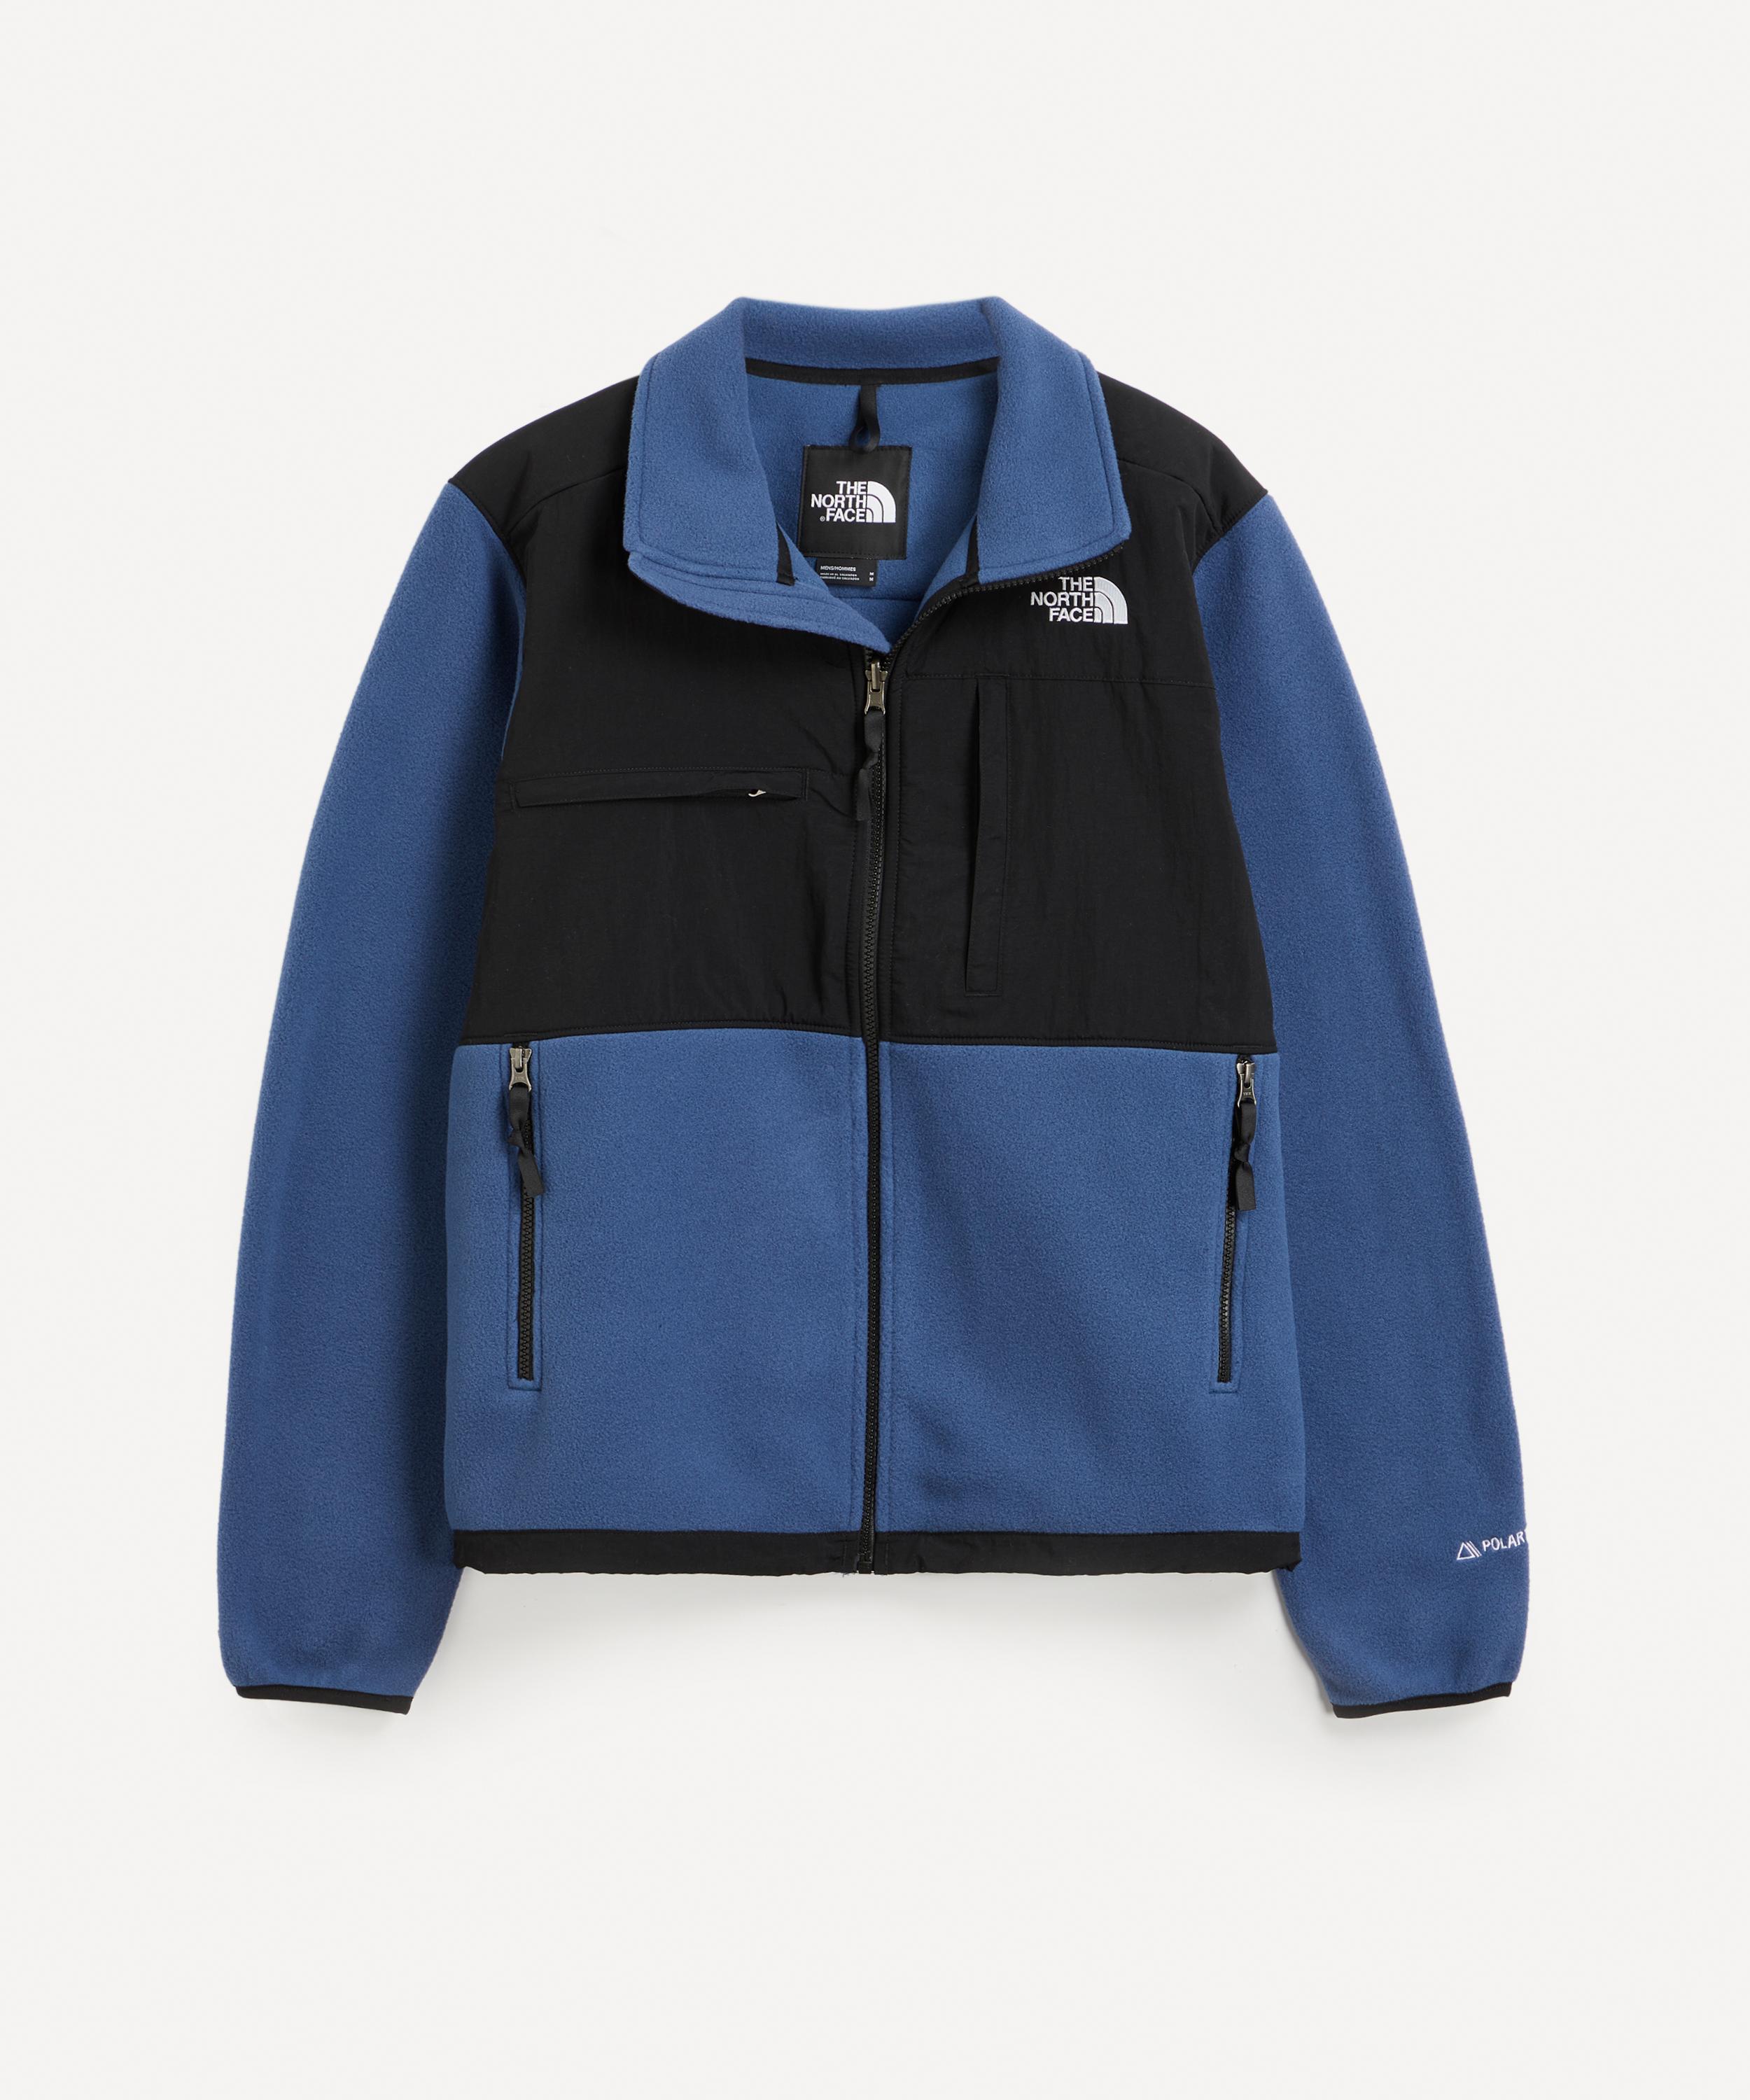 The North Face - Denali Fleece Jacket image number null